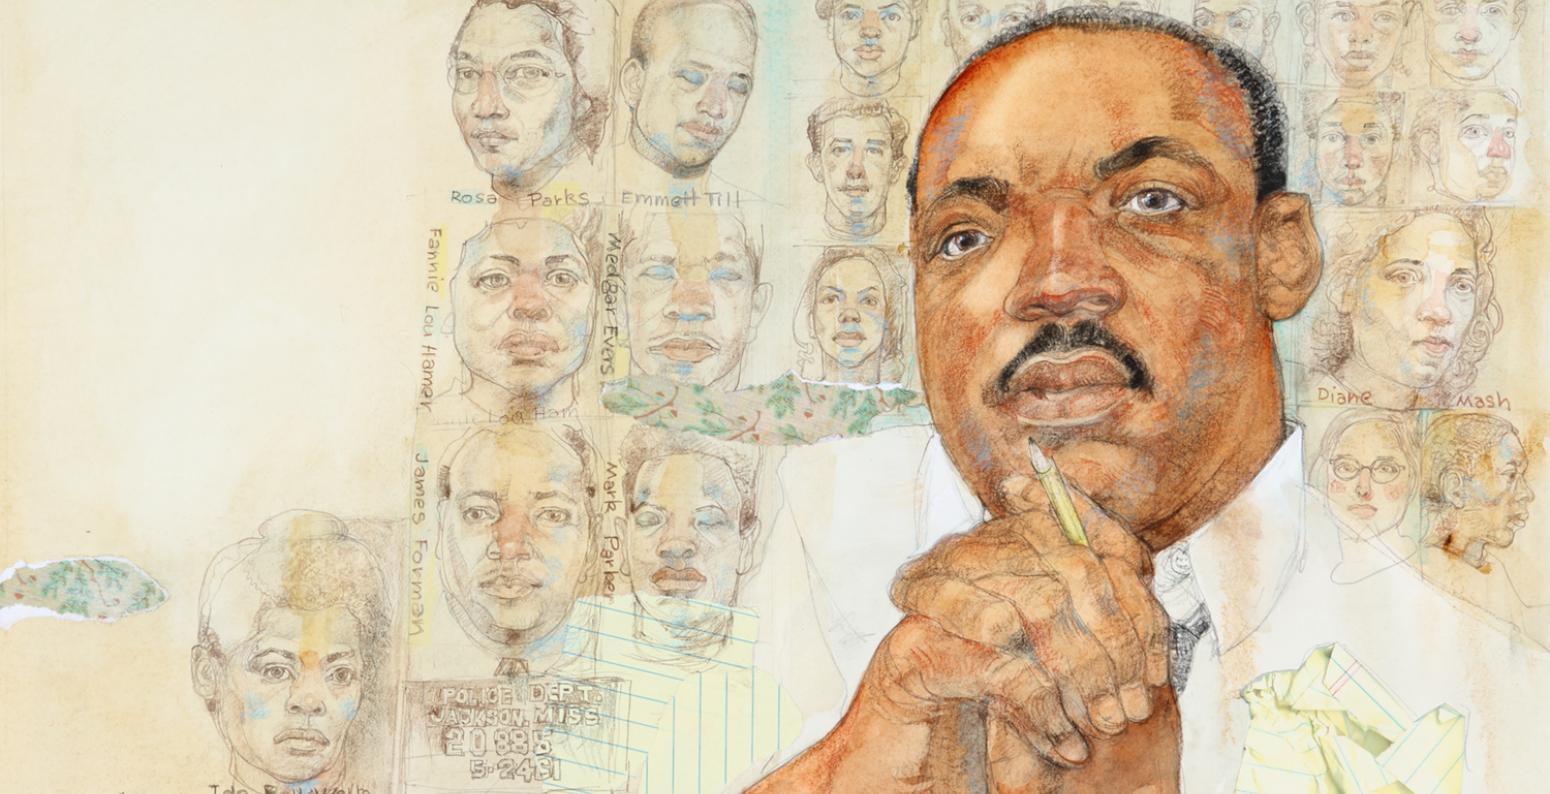 An illustration of Martin Luther King with his chin resting on his hands